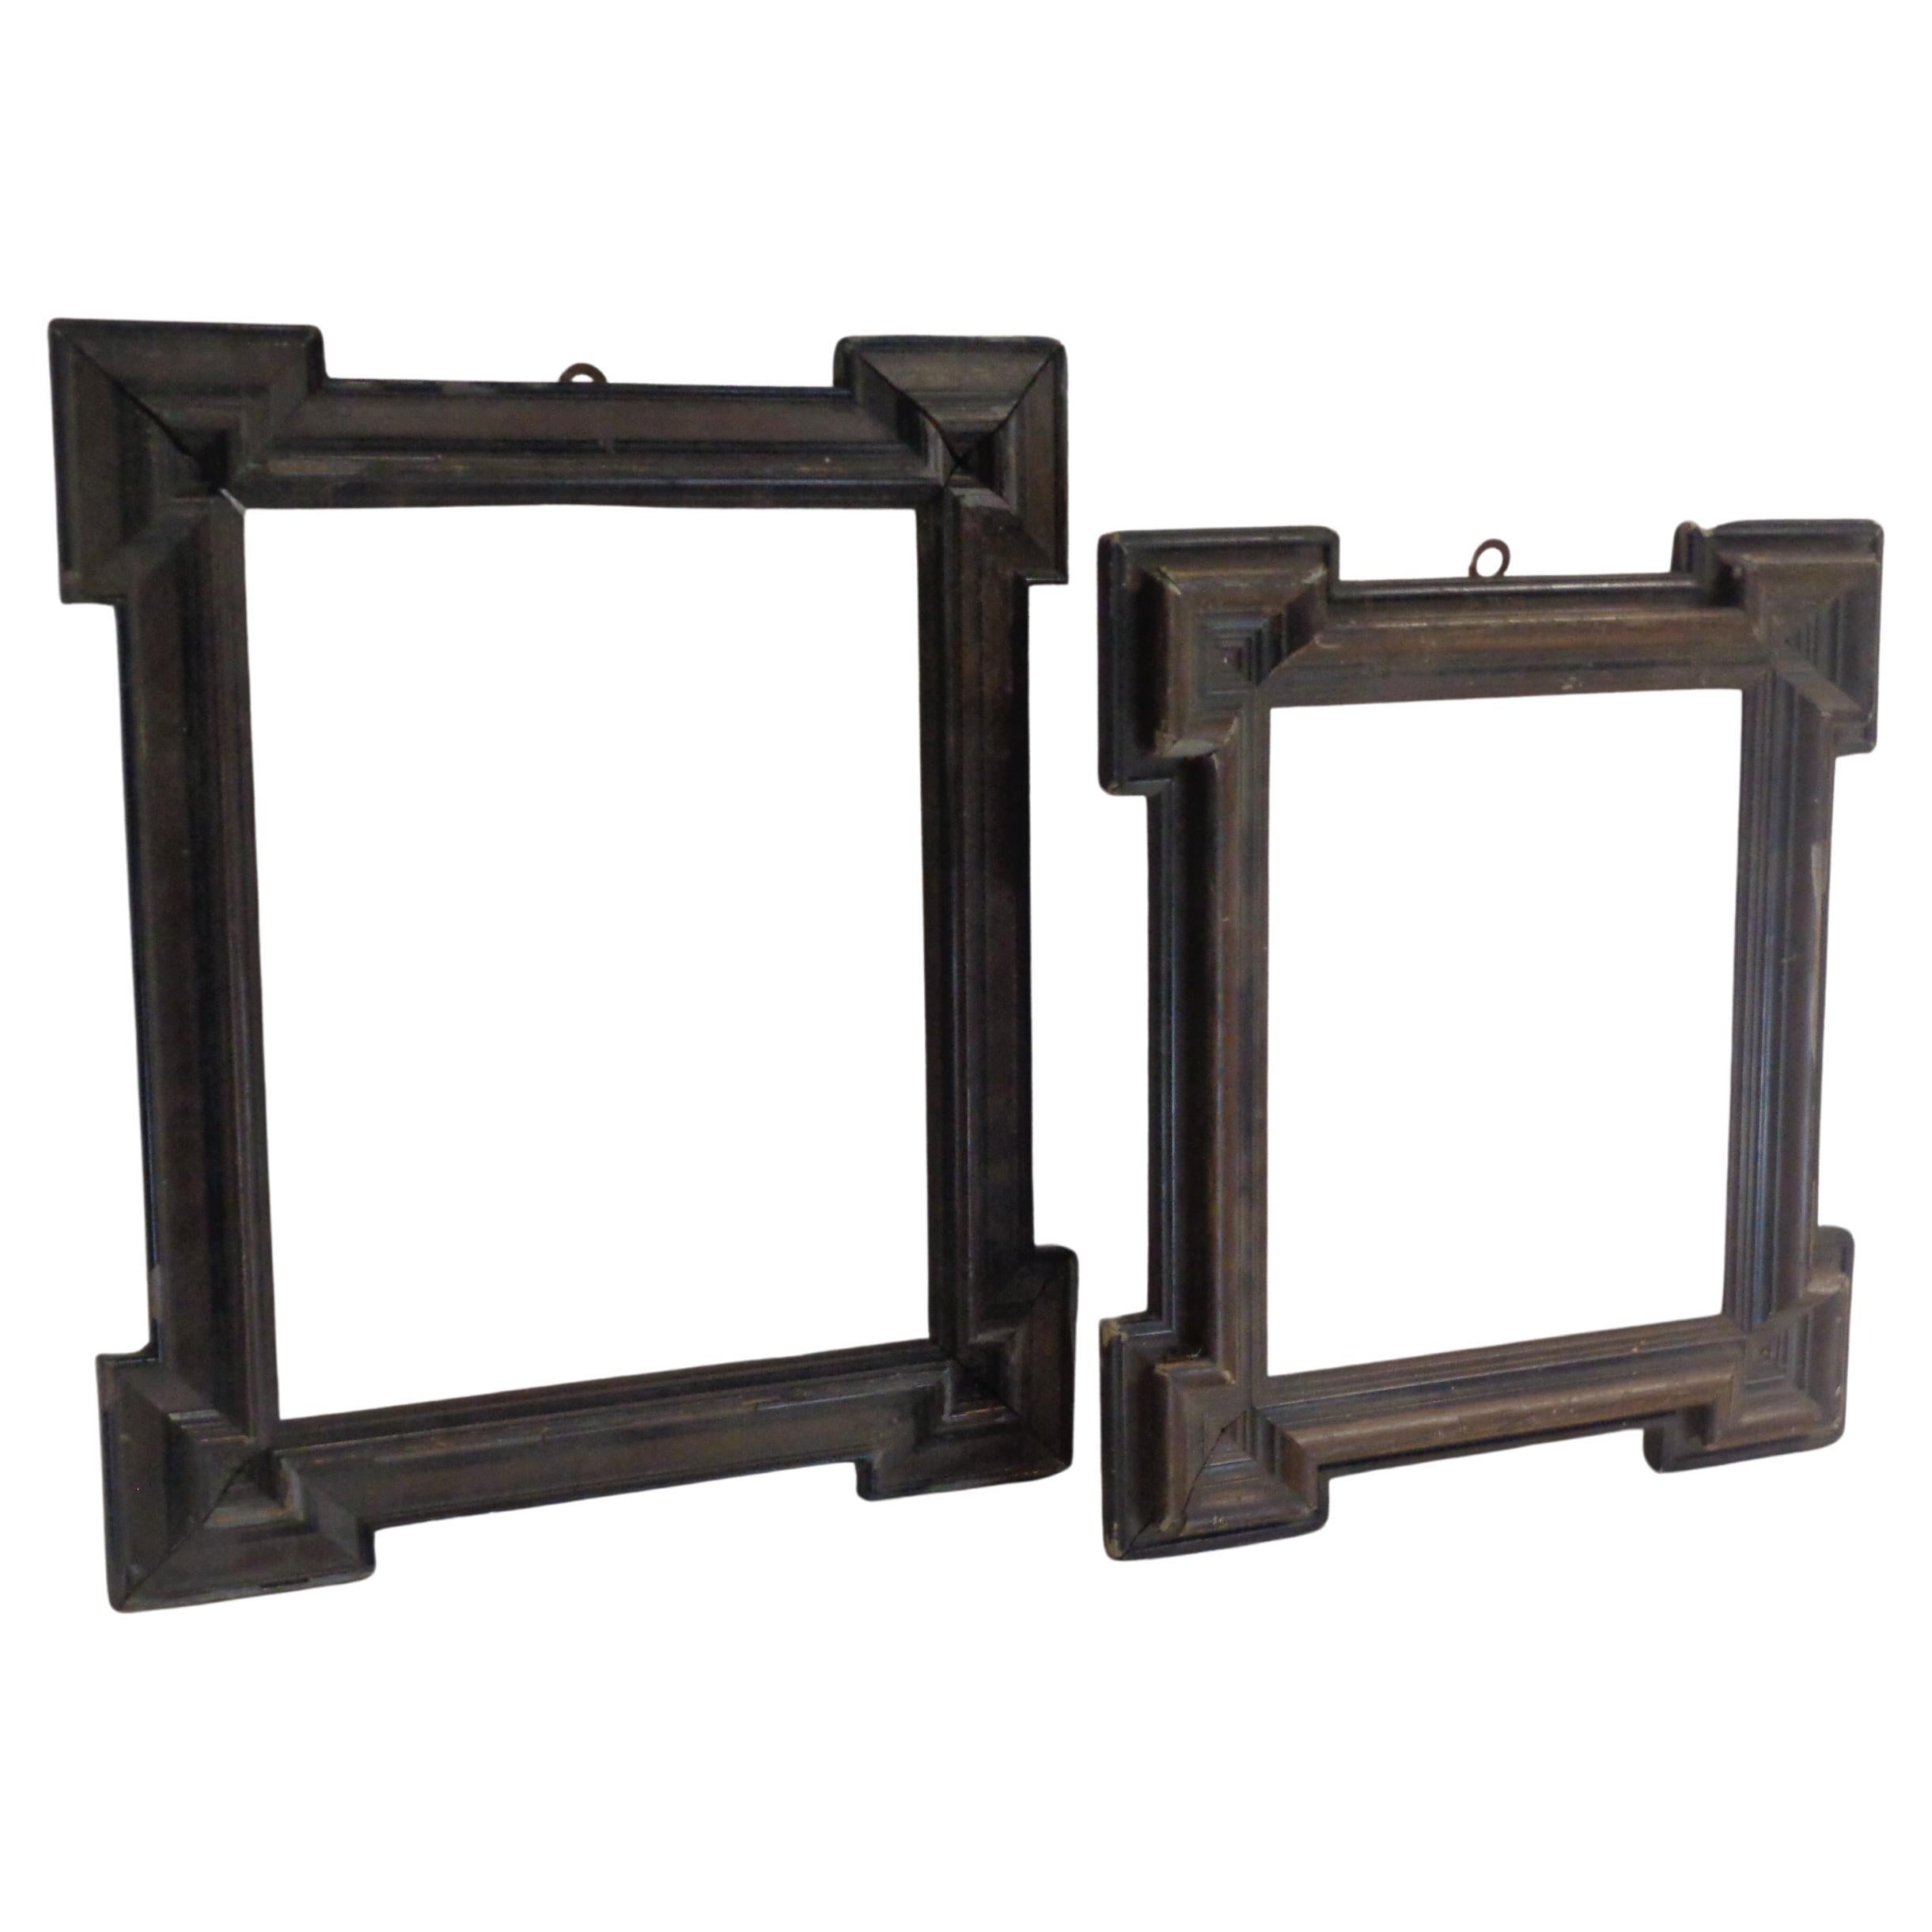 A near pair of carved wood frames w partially ebonized detailing in the 17th century Dutch style. European in origin. Circa 1880-1900. Larger frame measures 15.75